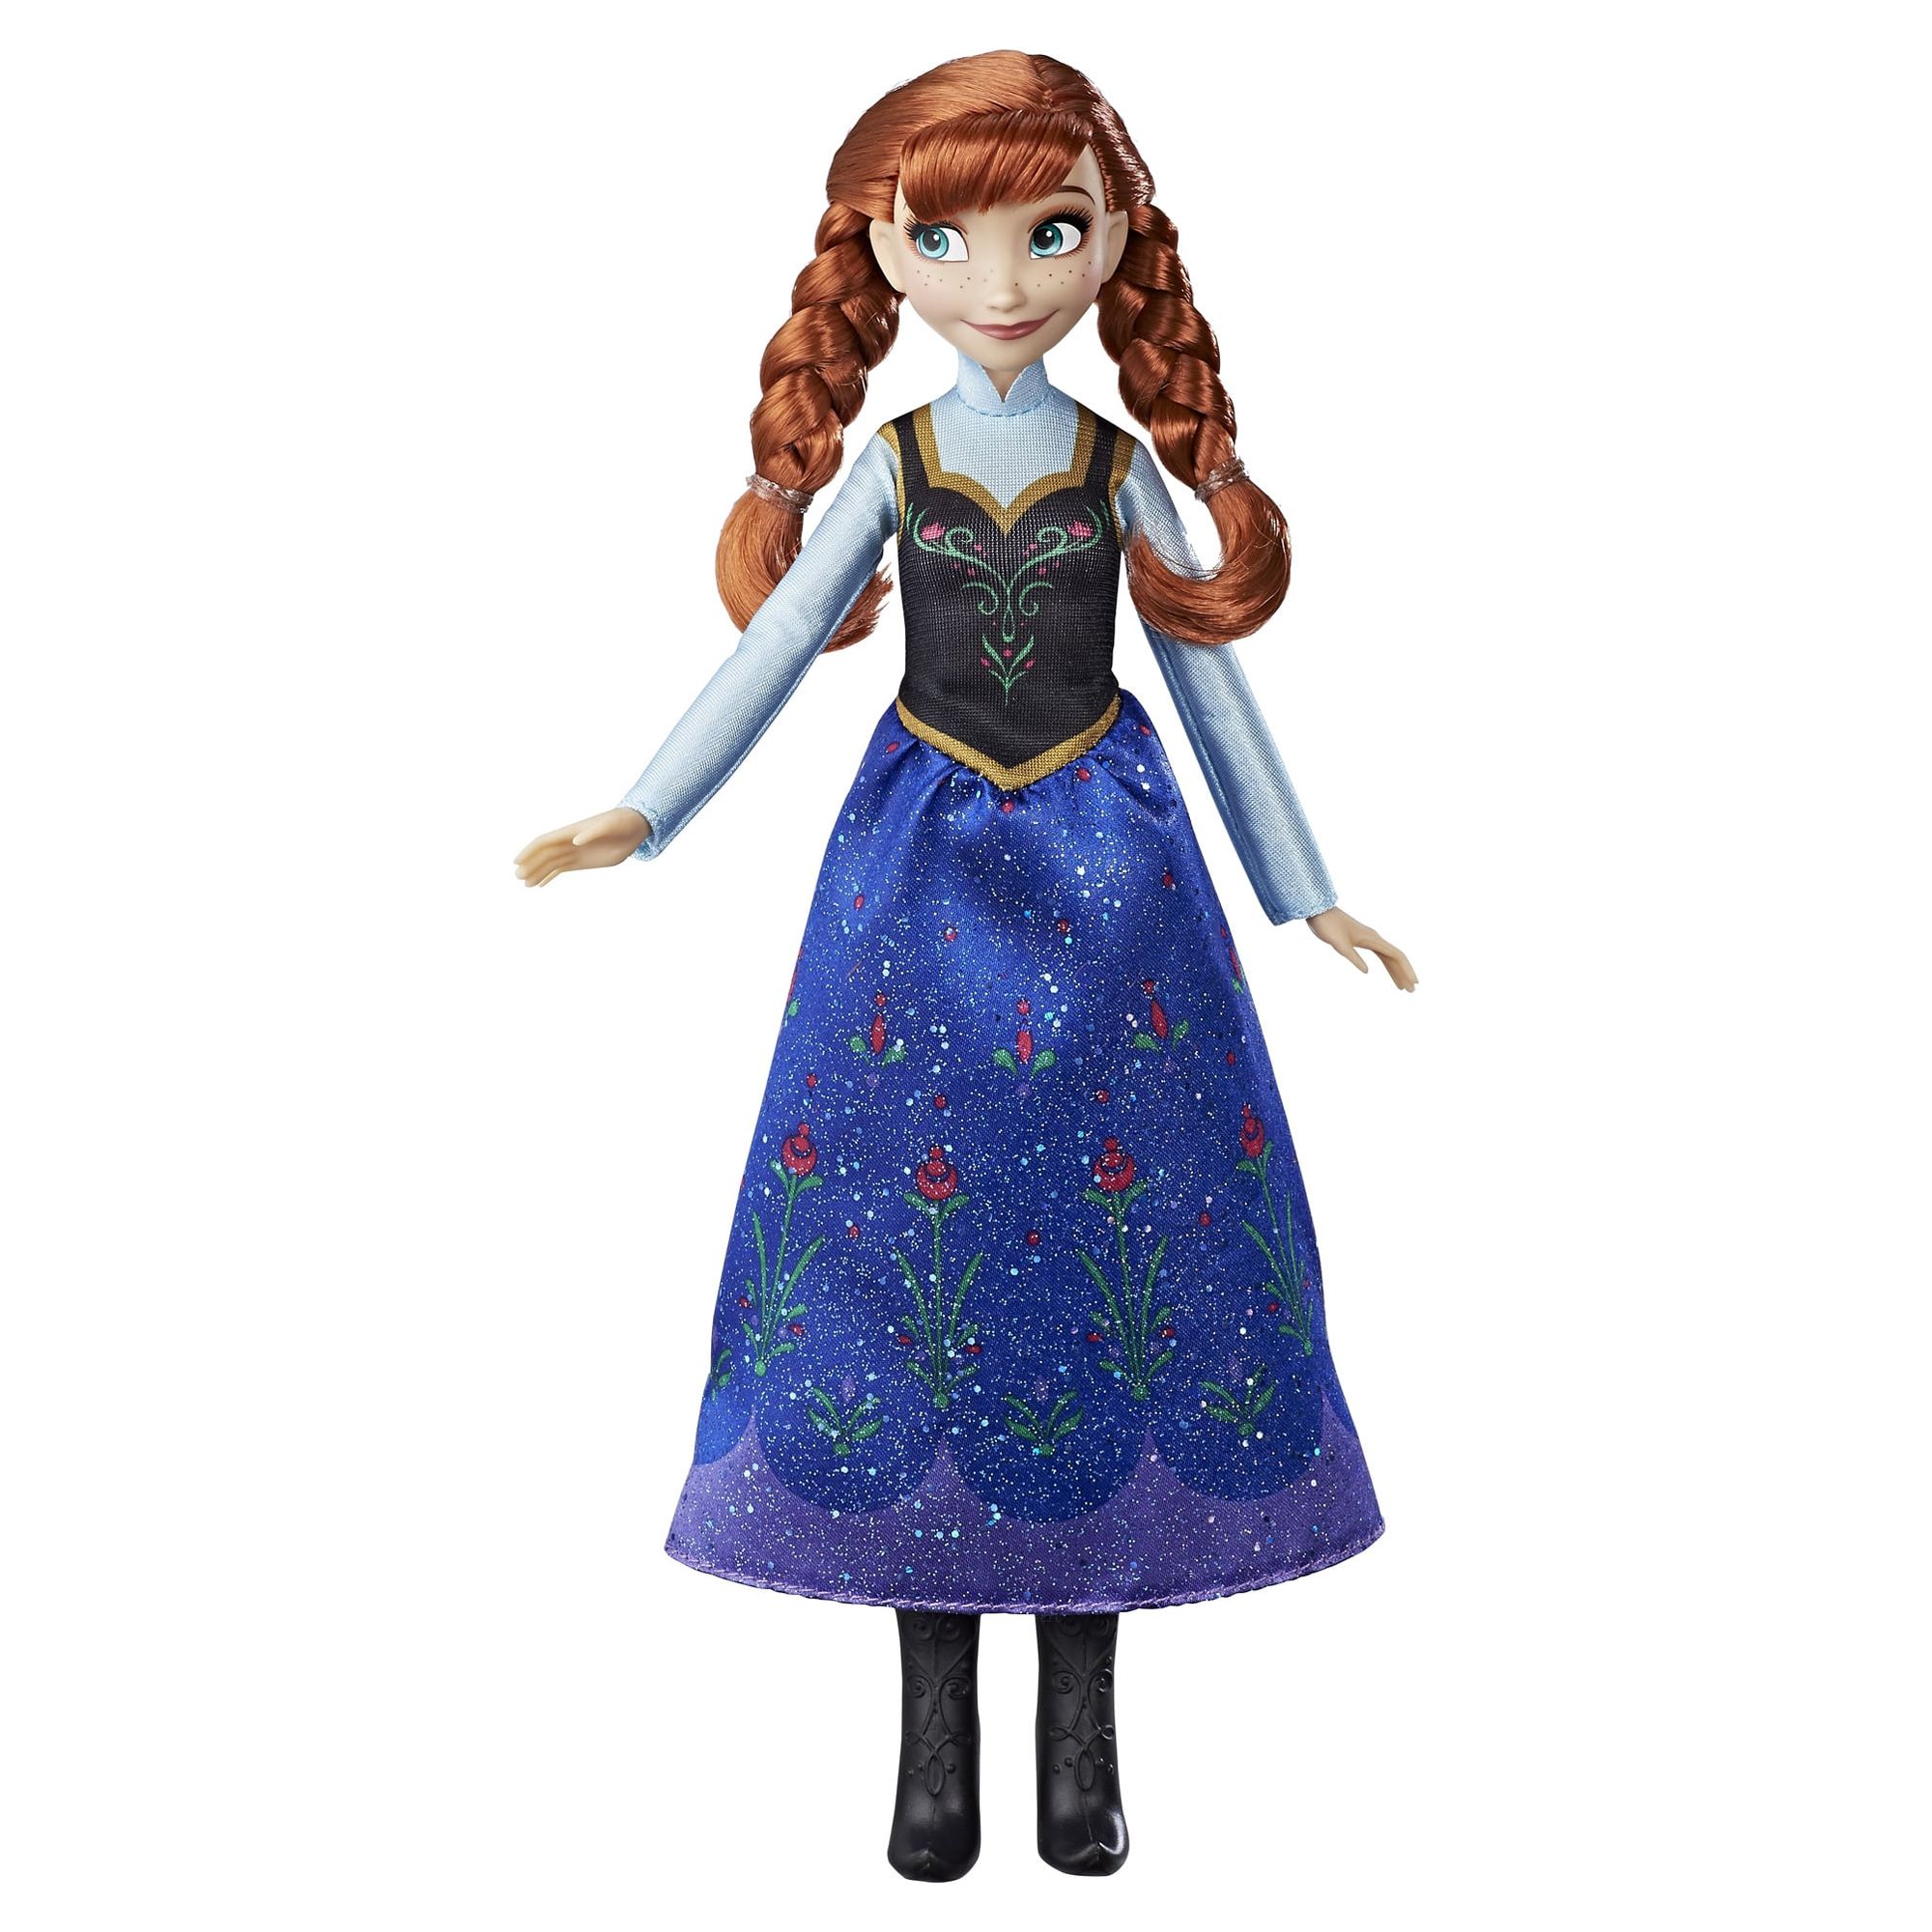 Disney Frozen Anna Classic Fashion Doll for Kids Ages 3 and up, Includes Outfit and Shoes - image 1 of 3